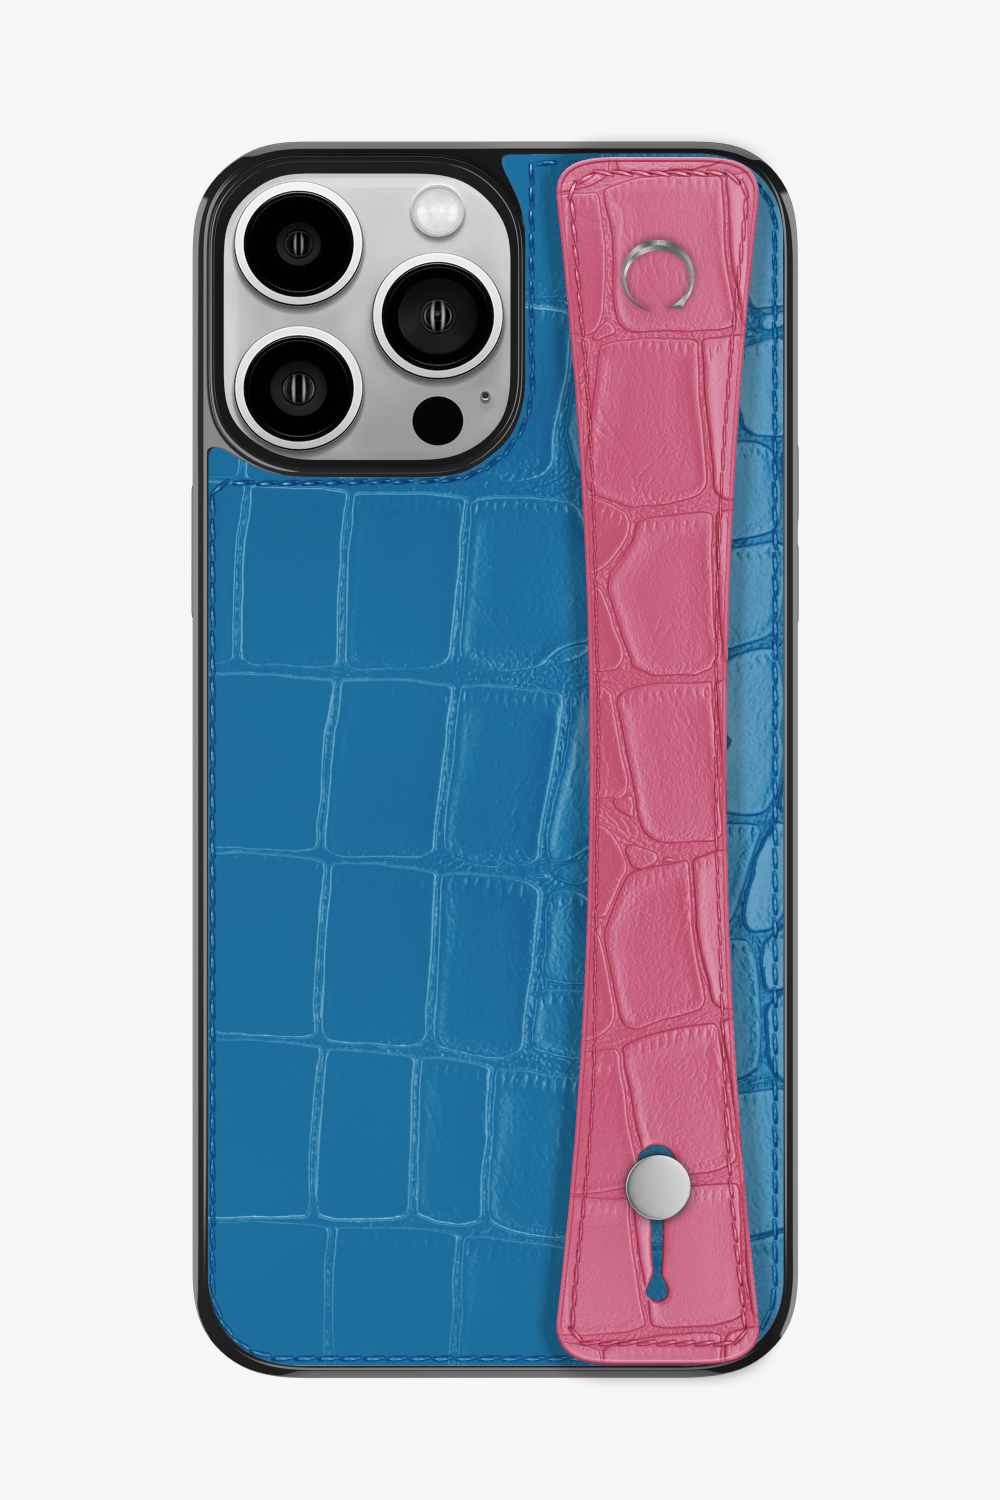 Alligator Sports Strap Case for iPhone 14 Pro Max - Blue Lagoon / Pink - zollofrance